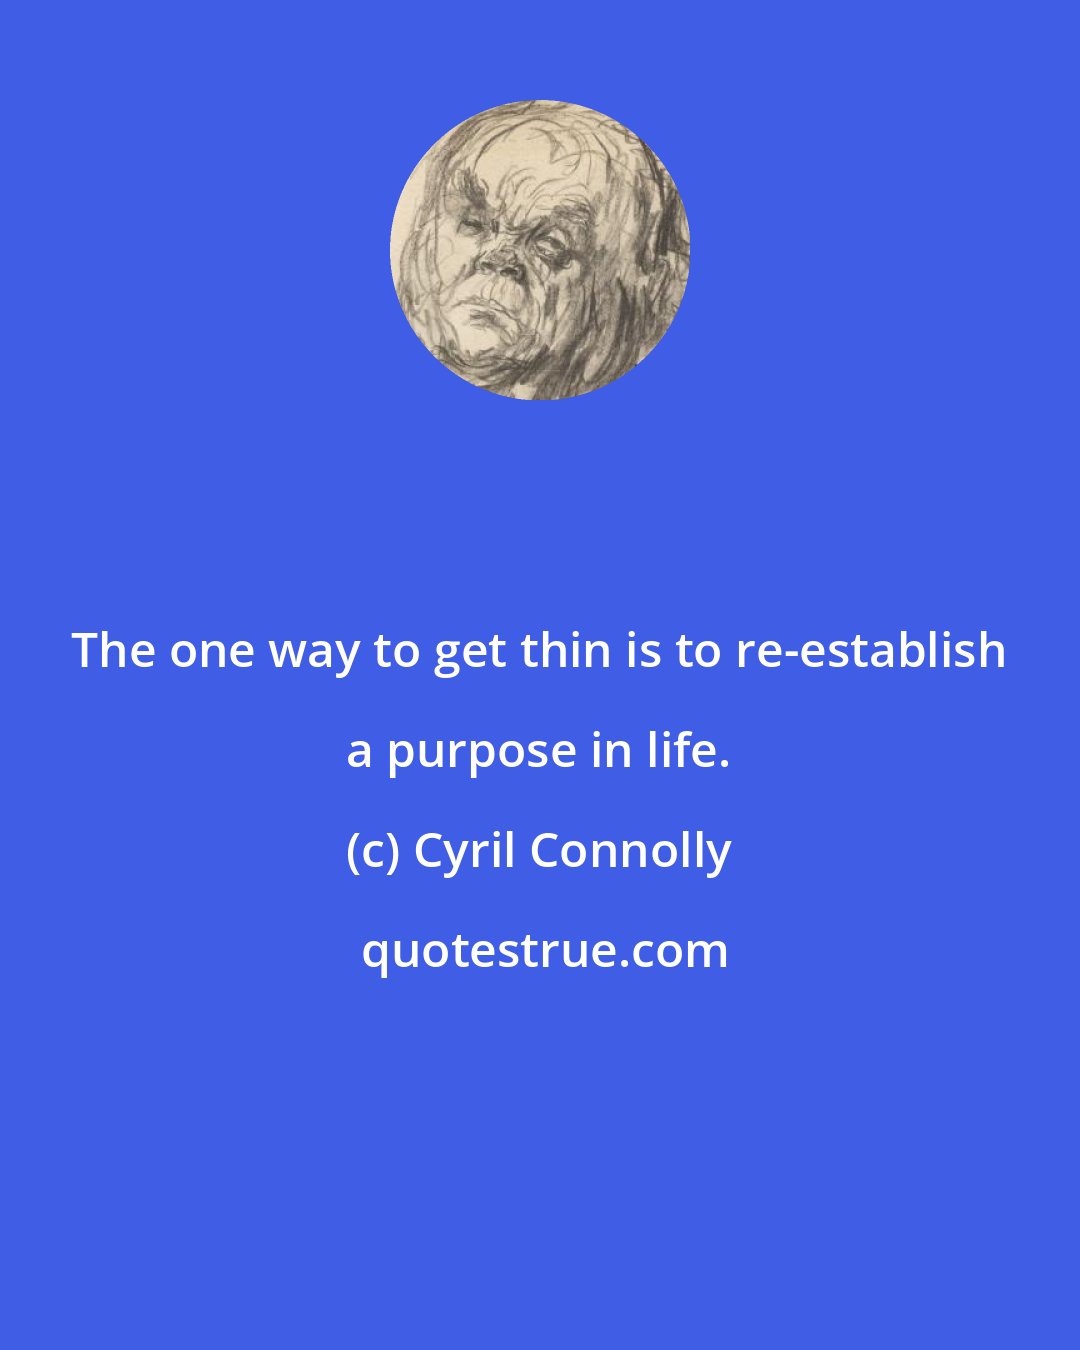 Cyril Connolly: The one way to get thin is to re-establish a purpose in life.